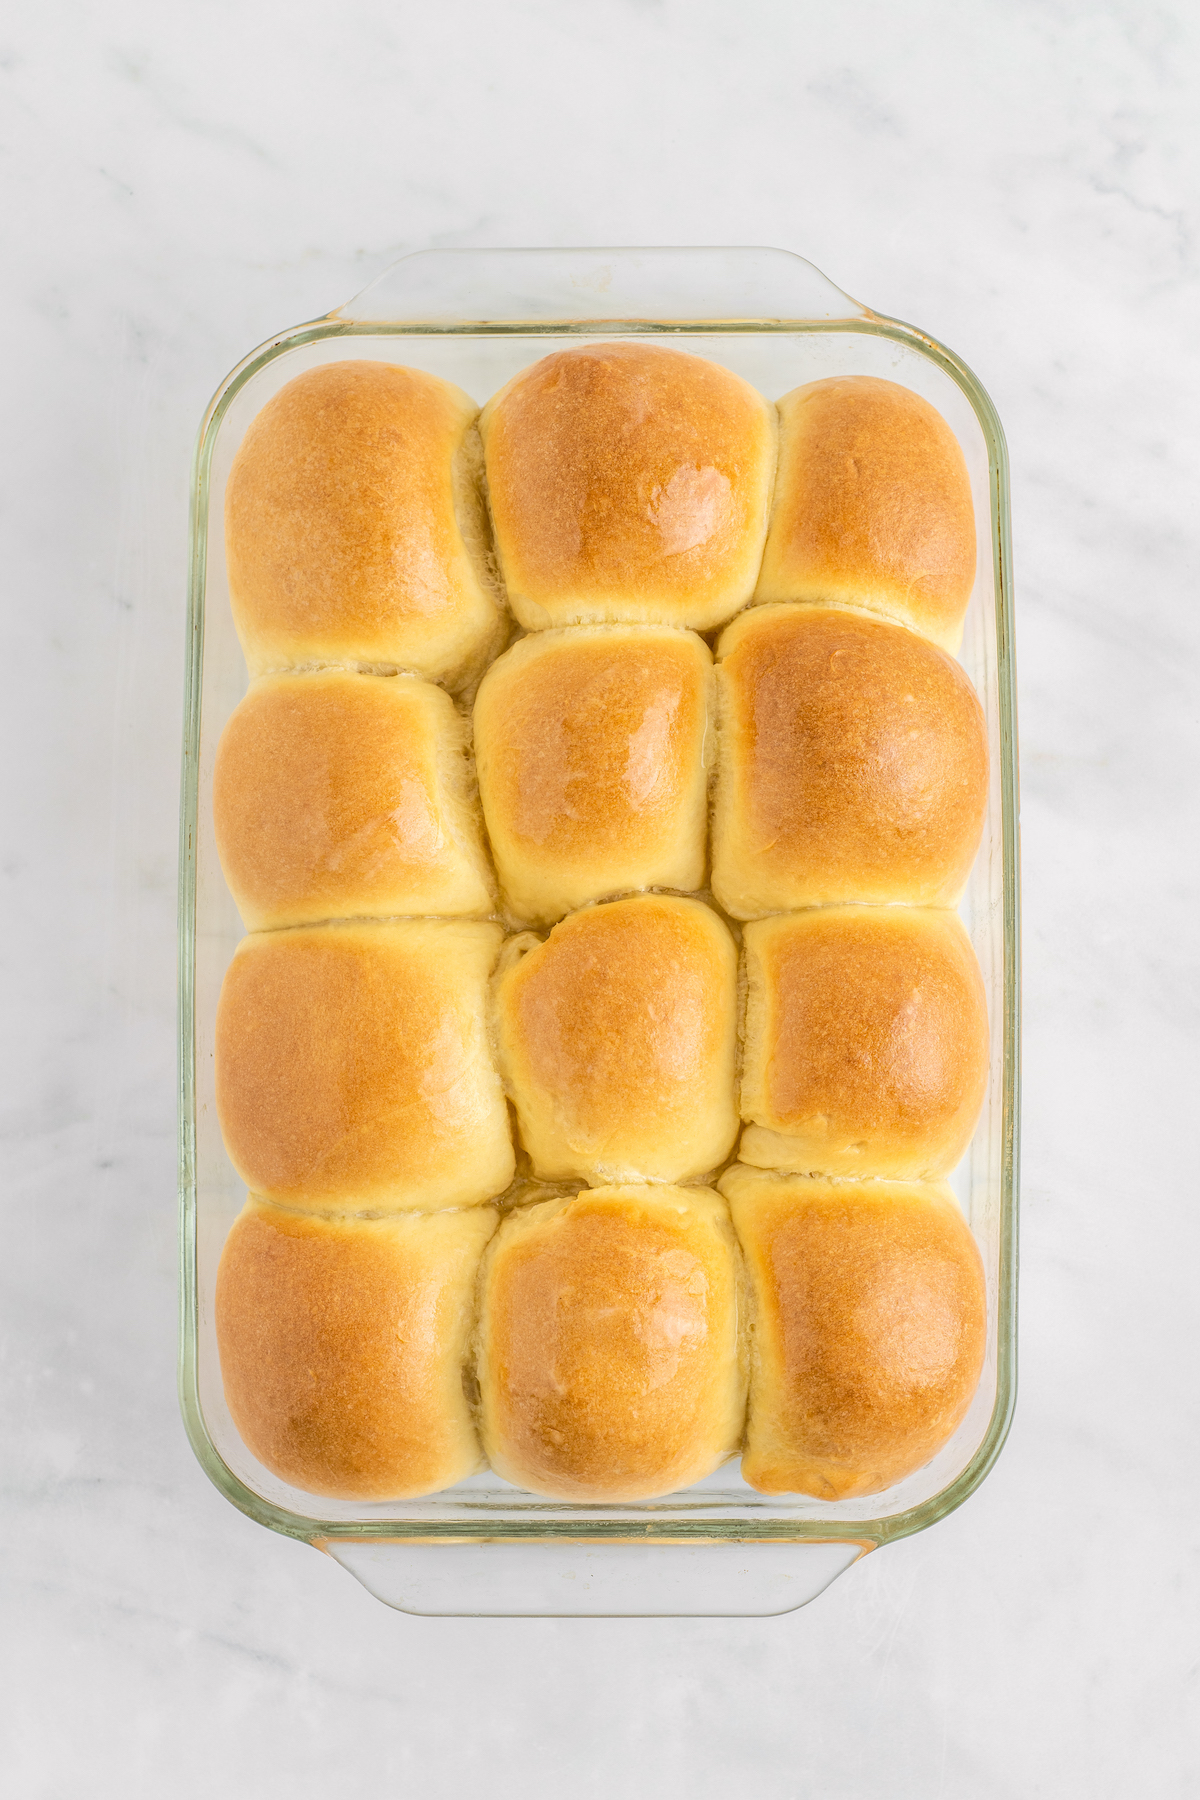 Baked dinner rolls recipe in a glass dish.